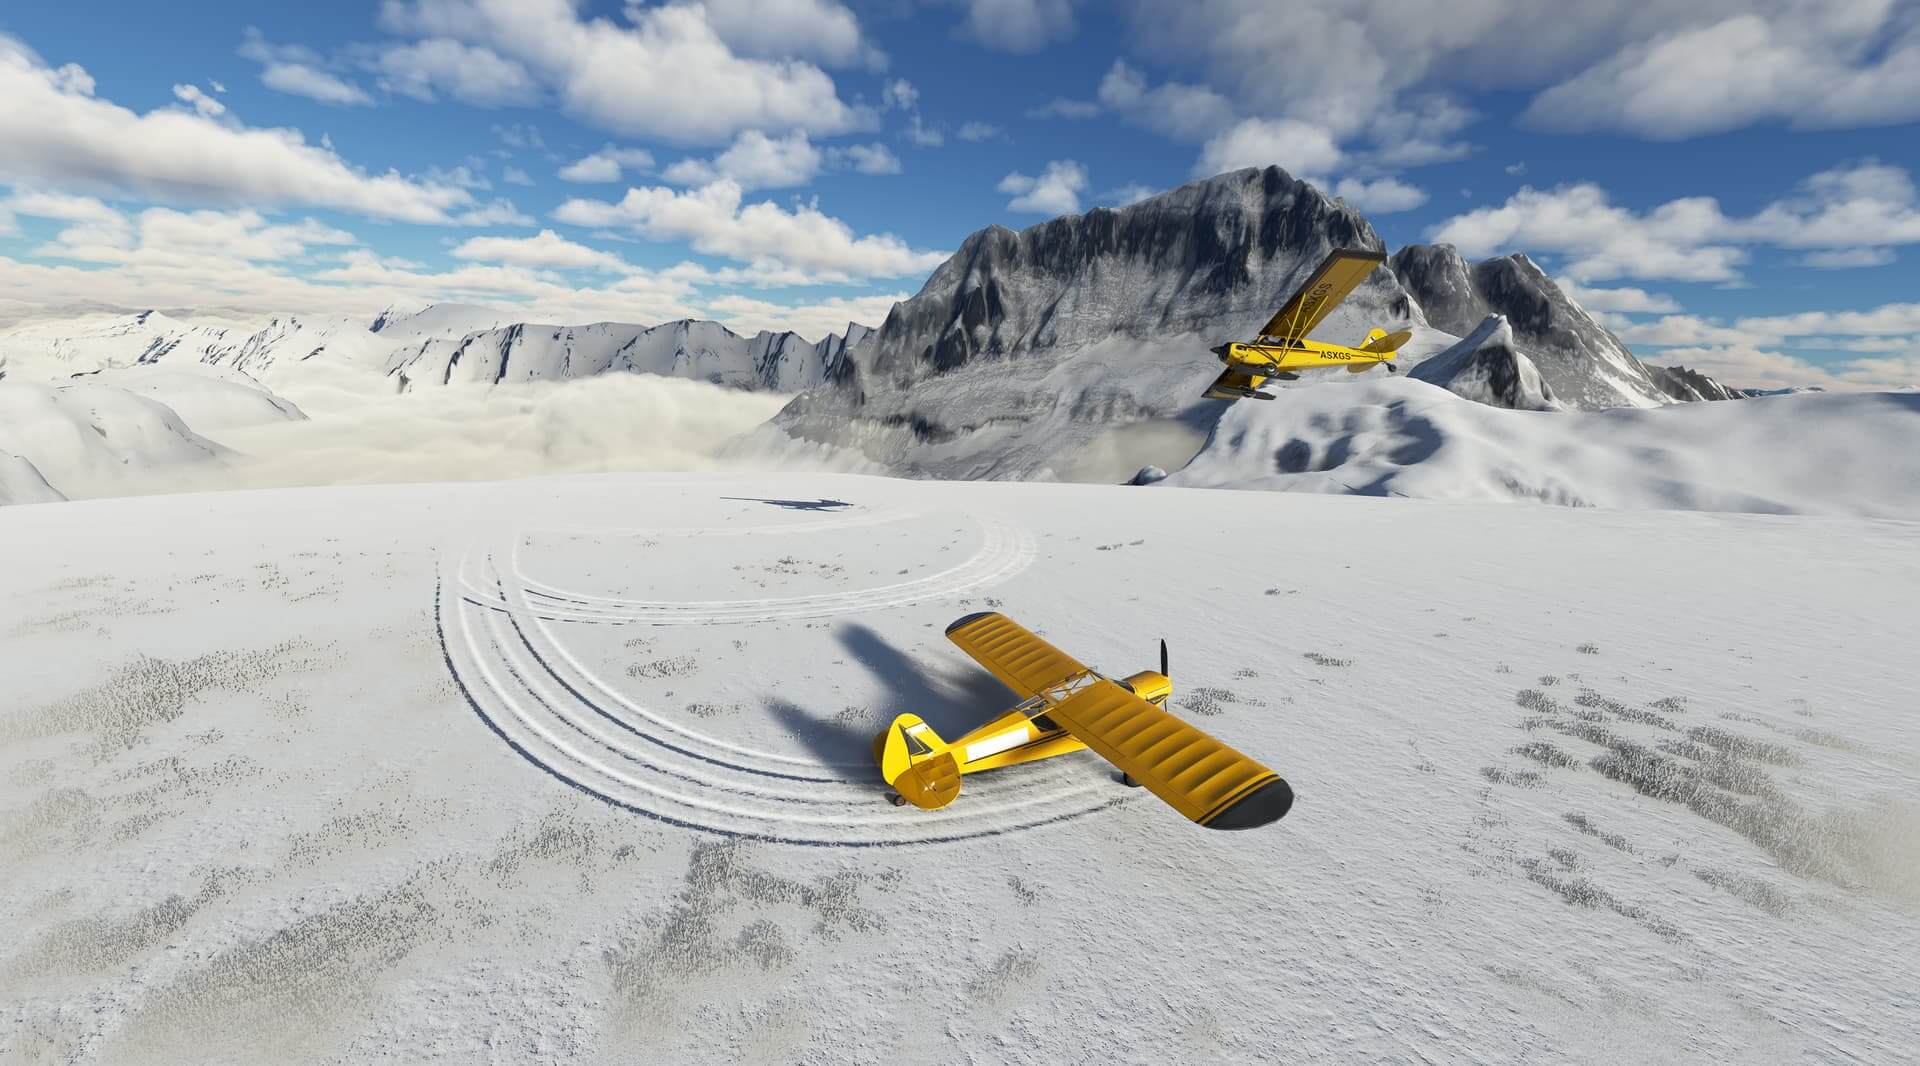 Two yellow X-Cubs enjoy some bushcraft flying across snow covered terrain